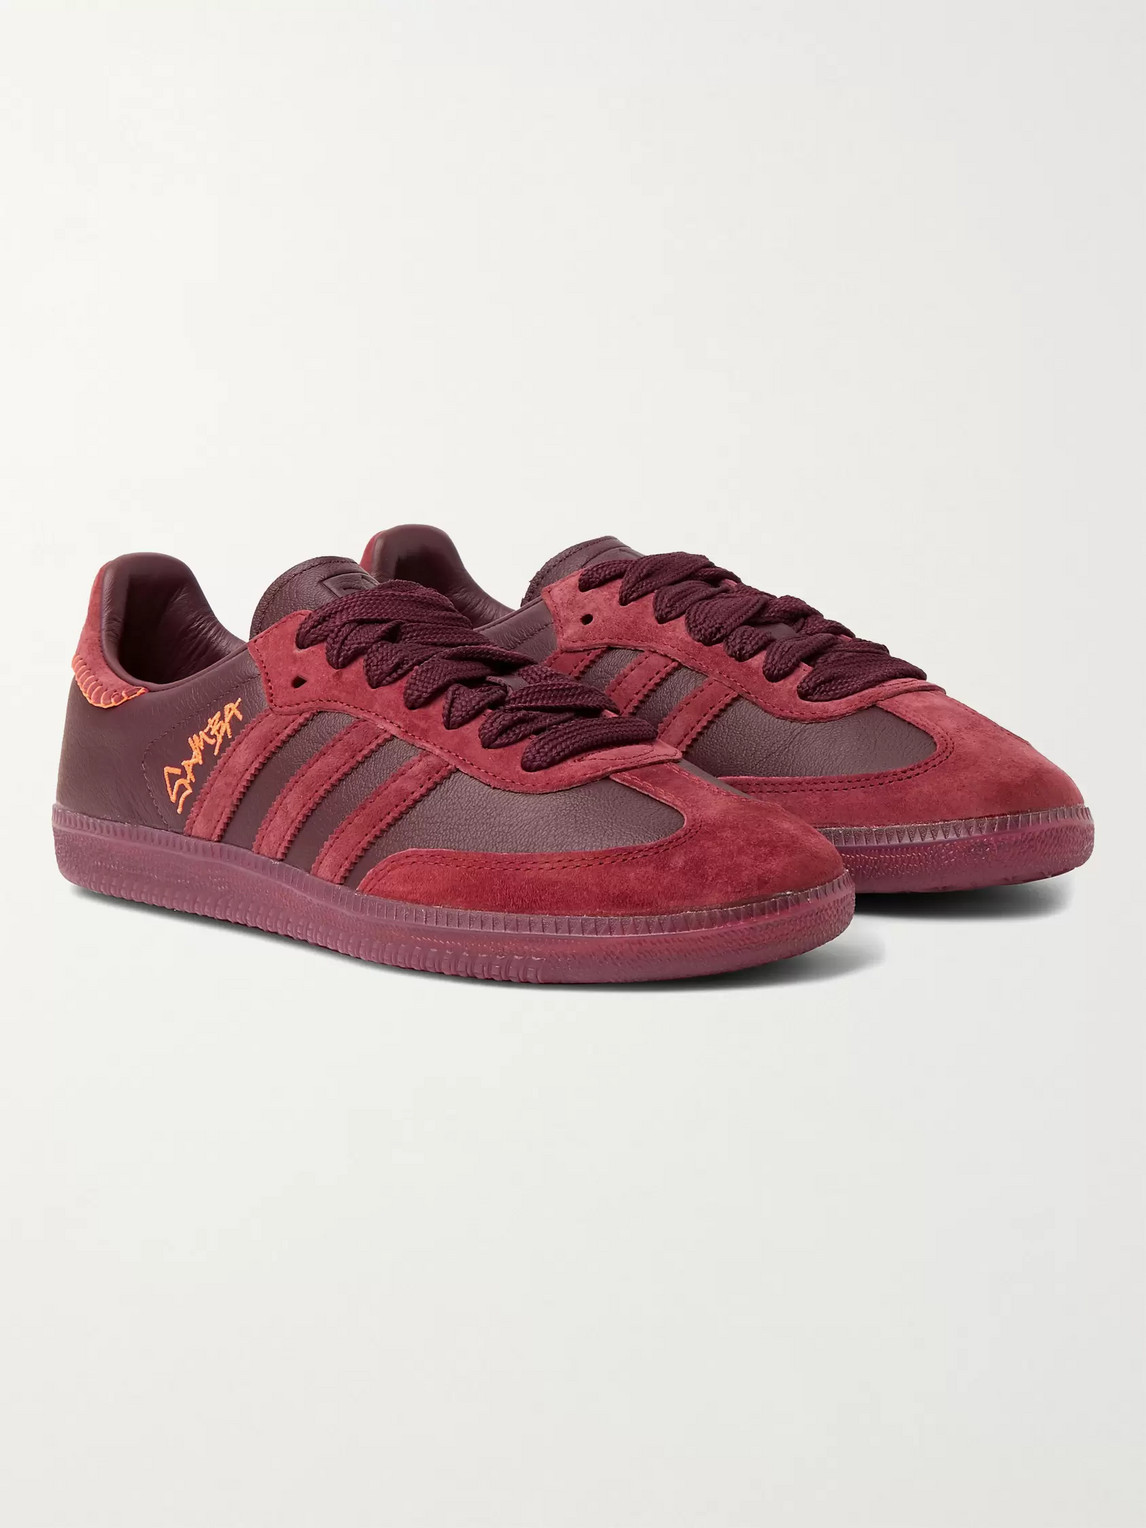 Adidas Consortium Jonah Hill Samba Embroidered Suede And Leather Sneakers In Burgundy